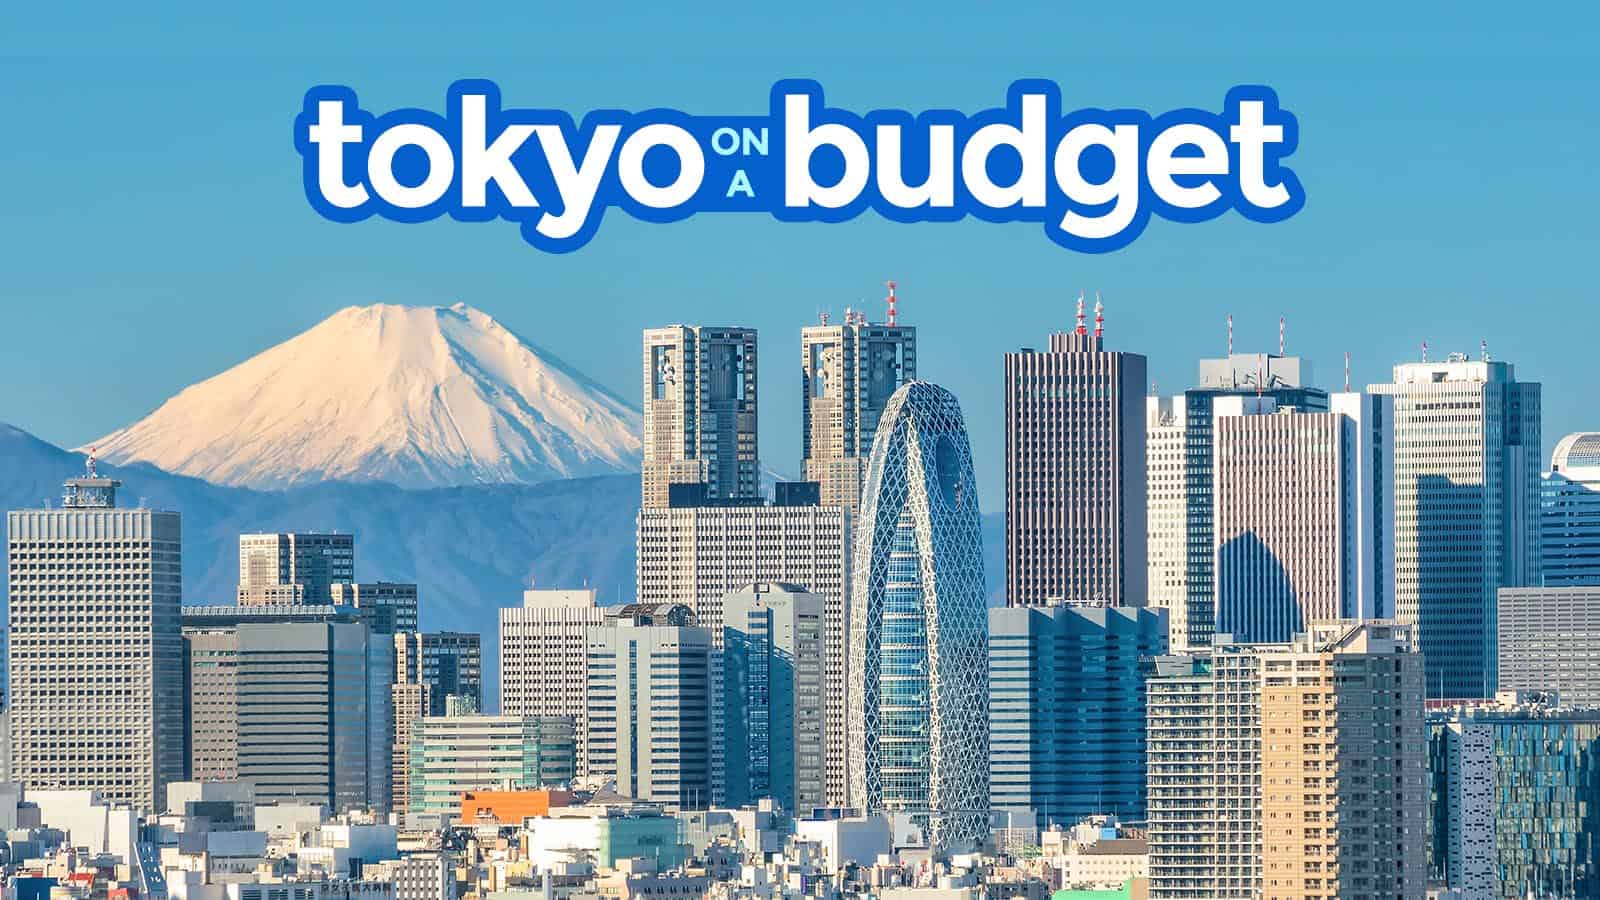 2019 Tokyo On A Budget Travel Guide Itineraries The Poor - 2019 tokyo on a budget travel guide itineraries